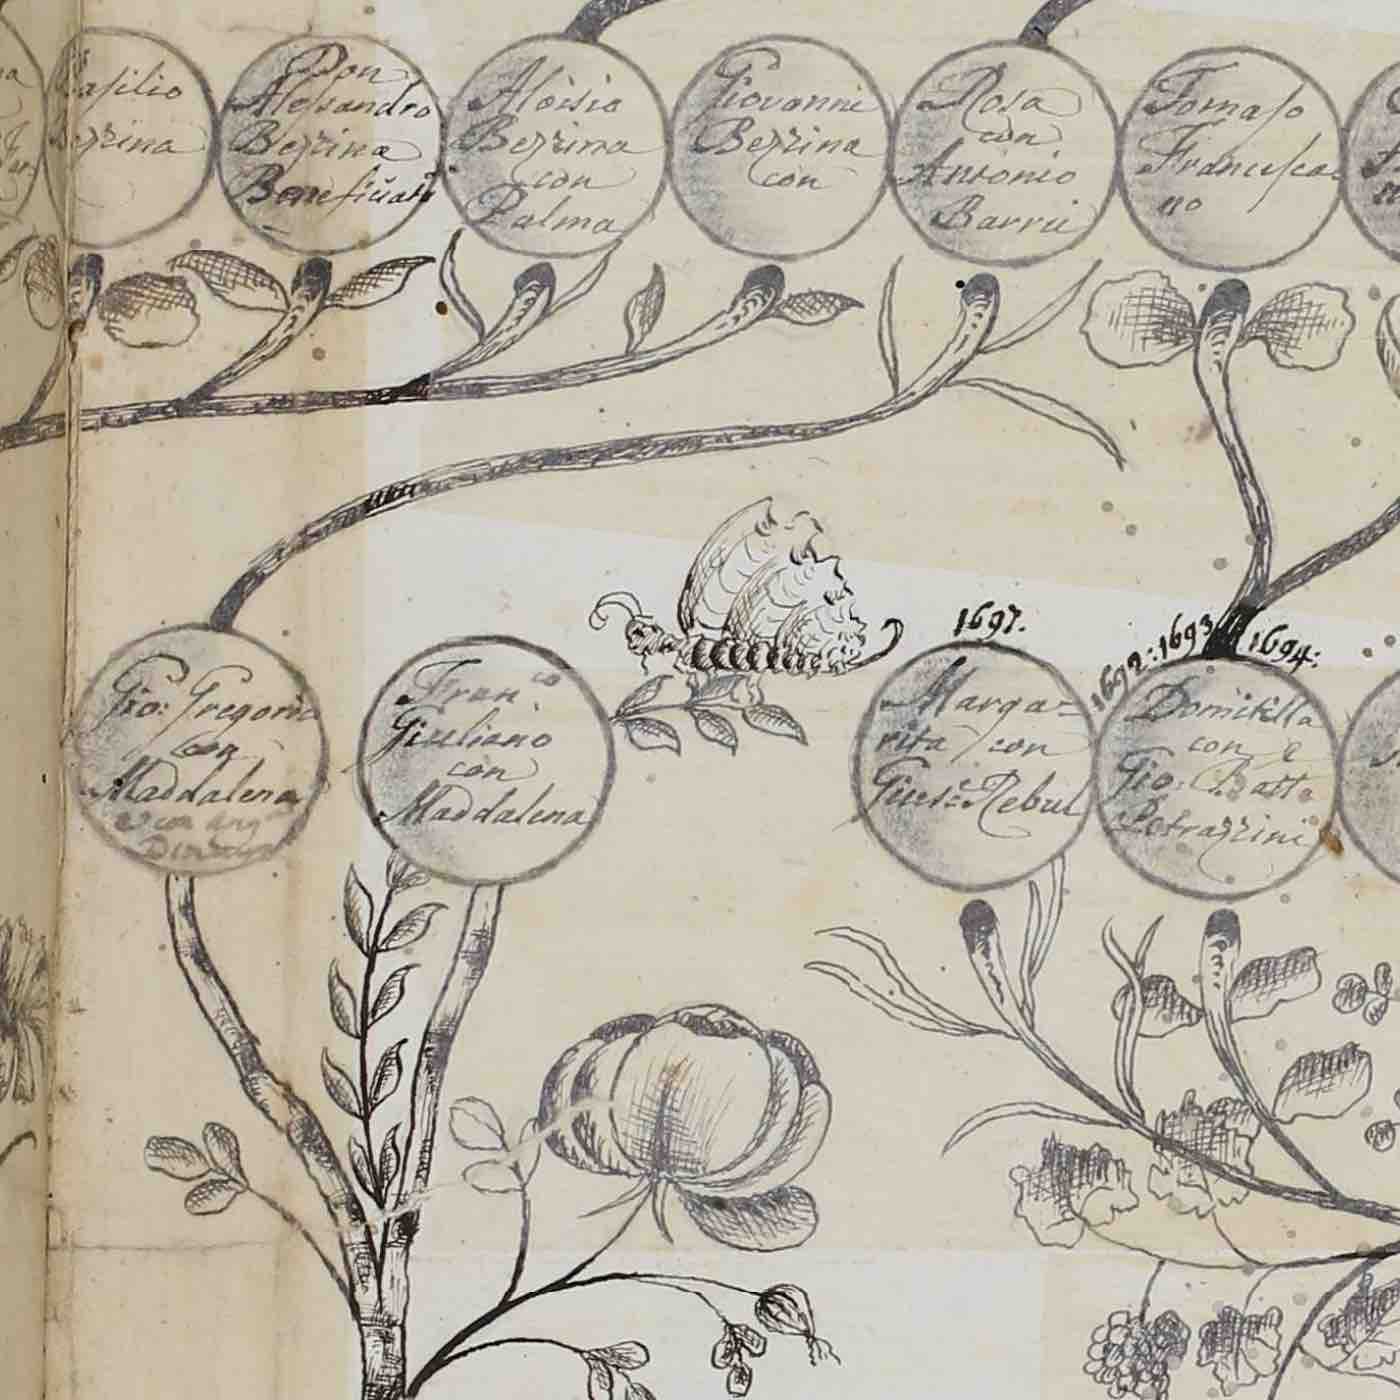 Massa family tree, Confraternity of Charity. (<a href='https://w3id.org/vhmml/readingRoom/view/222195'>KKM 00154</a>)